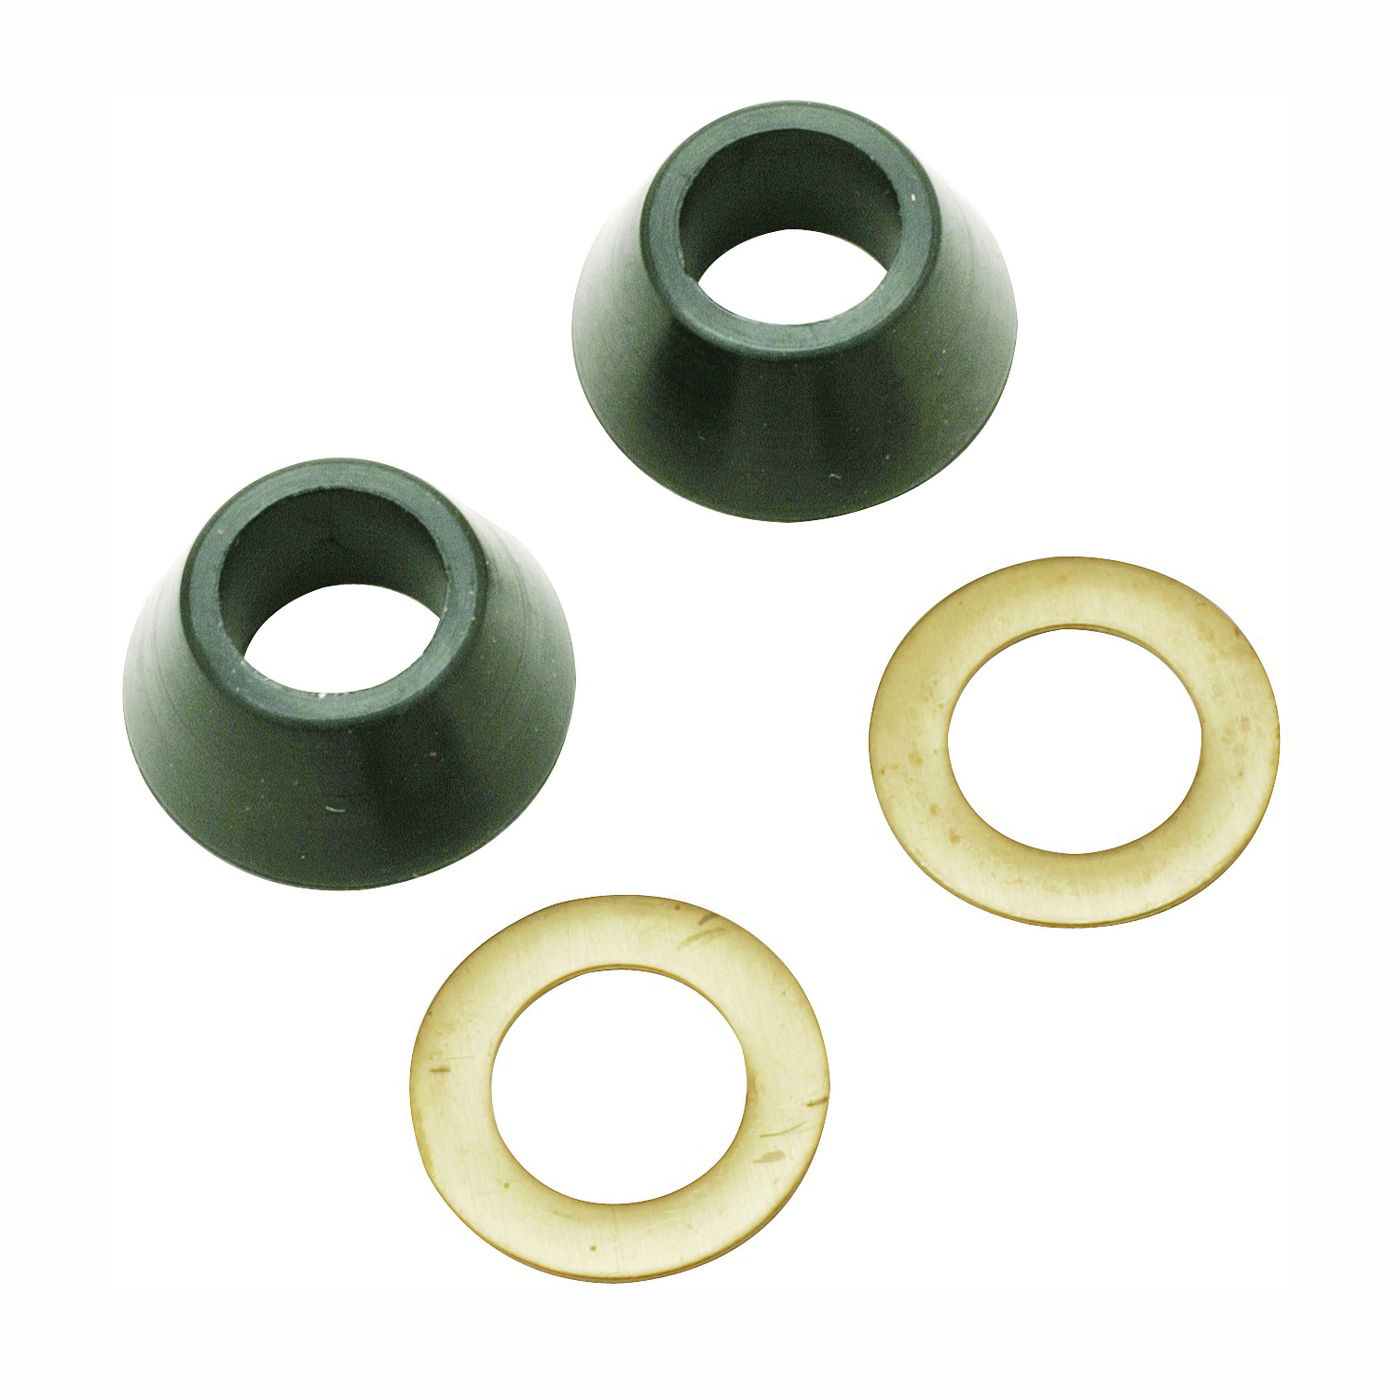 PP810-32 Cone Washer and Ring, 7/16 in ID x 5/8 in OD Dia, For: Faucet or Ballcock Nut